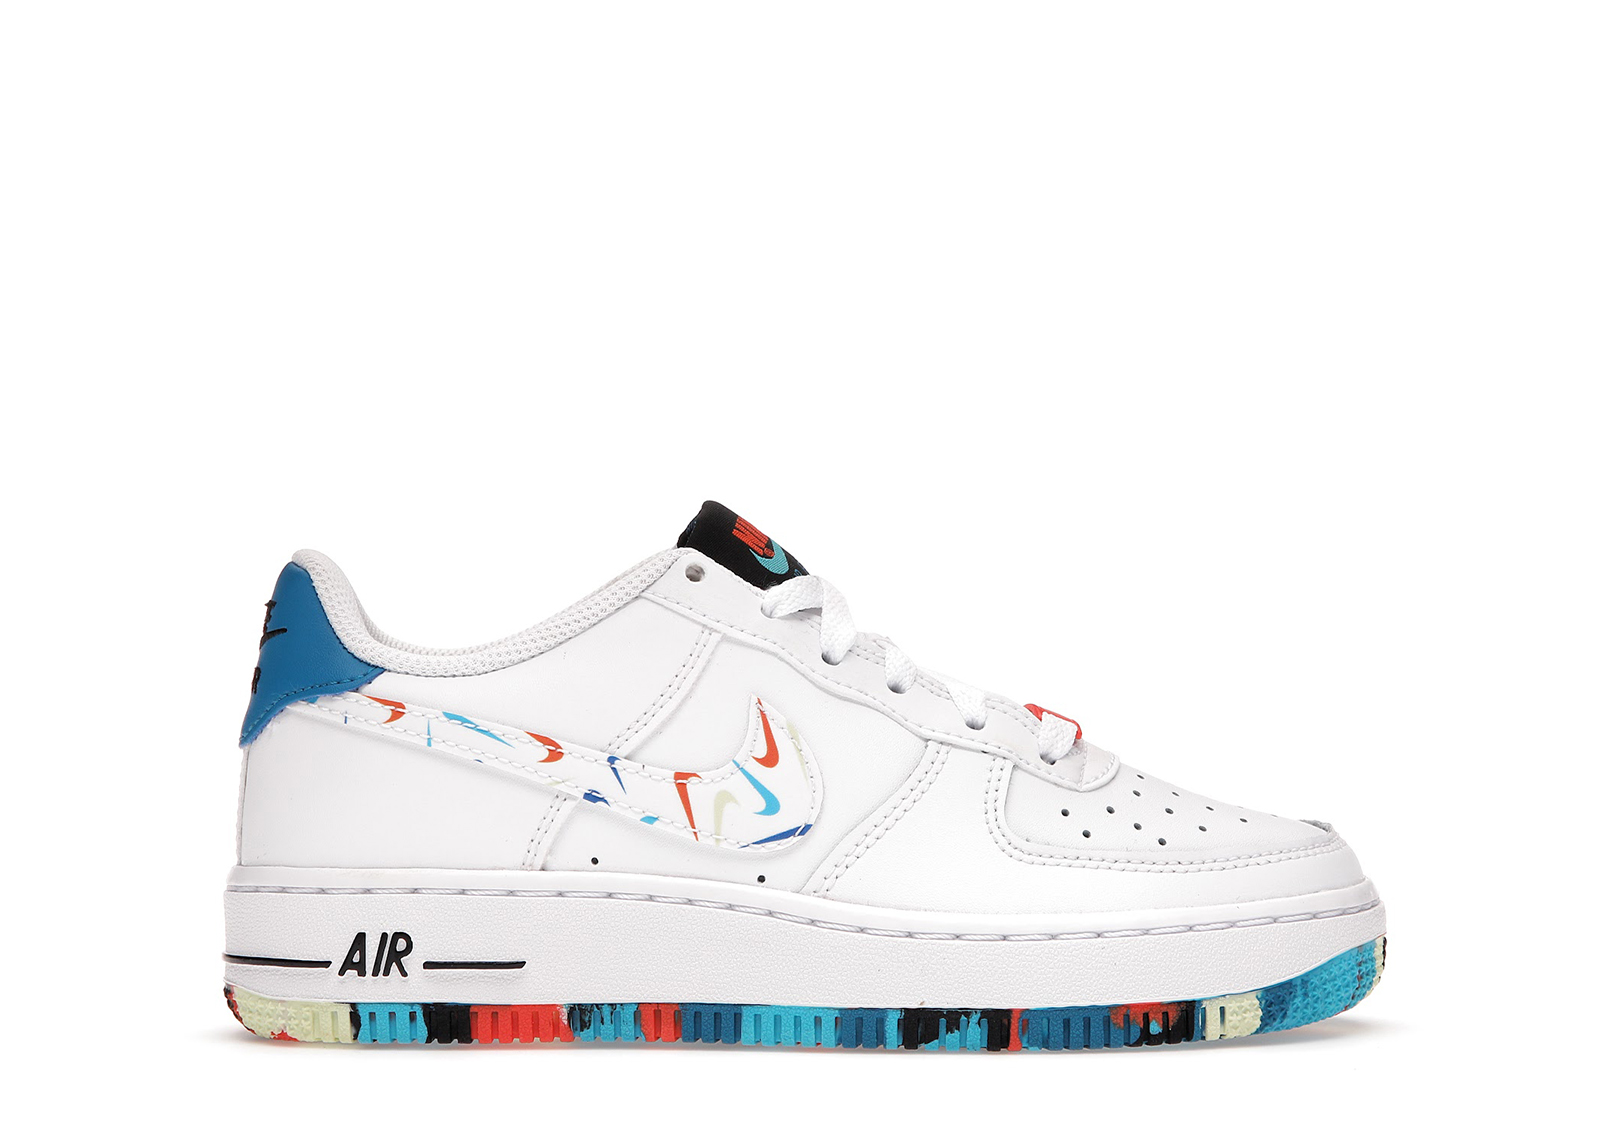 Nike Air Force 1 Low Multicolor Swooshes (GS) キッズ - DM7597 ...